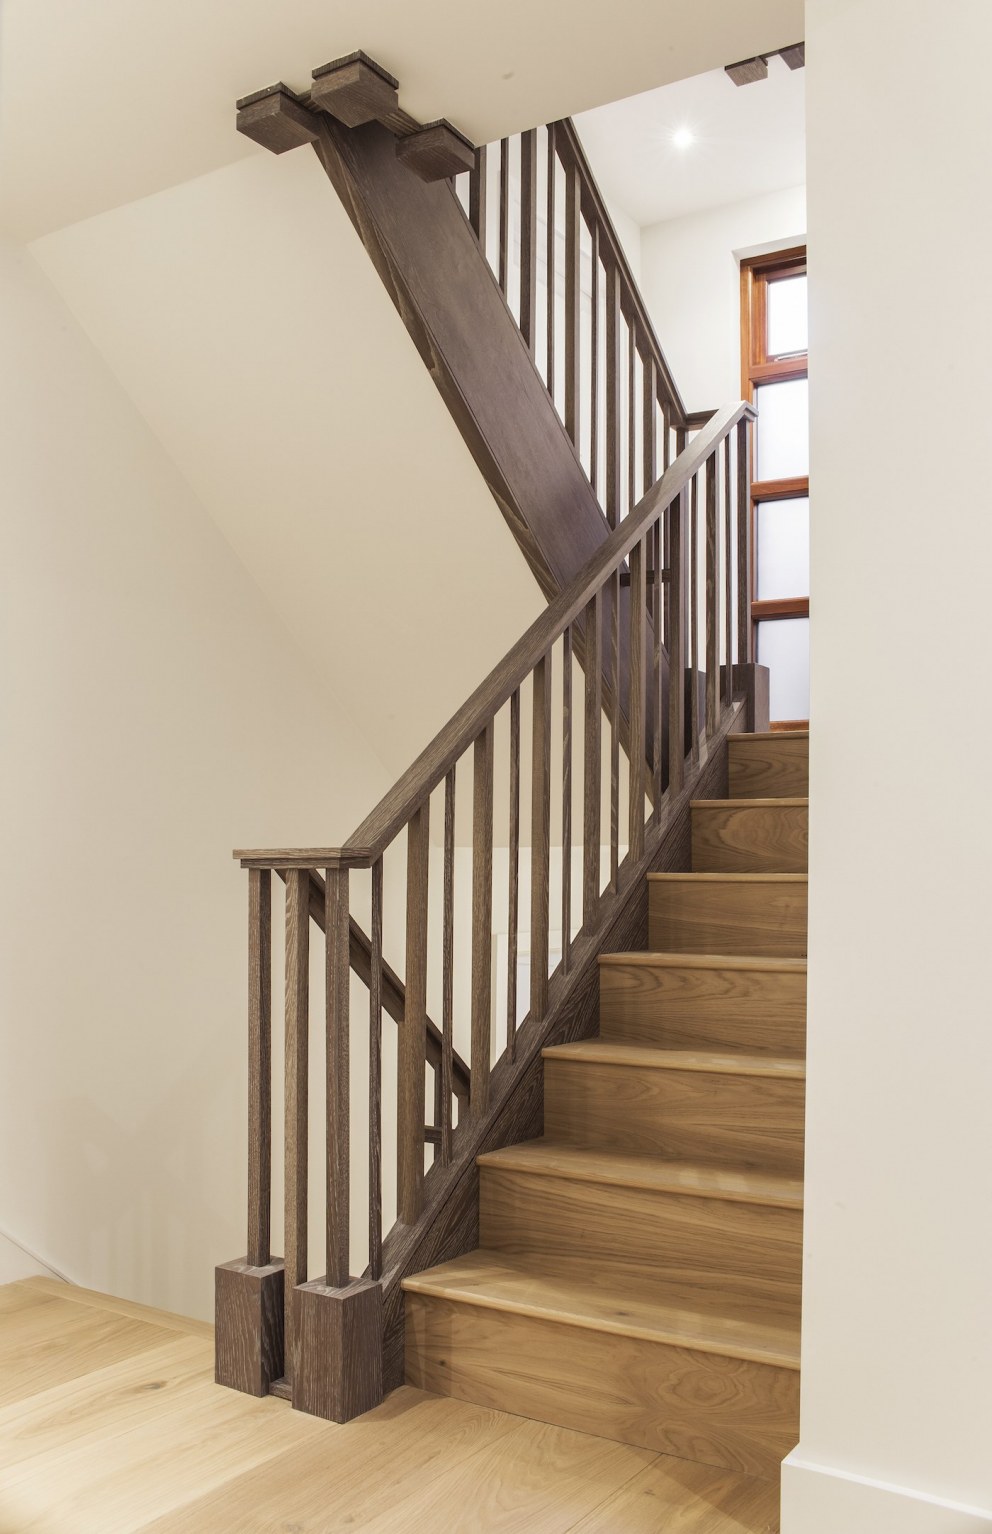 3000 sqft Townhouse - Highgate | Bespoke joinery staircase  | Interior Designers